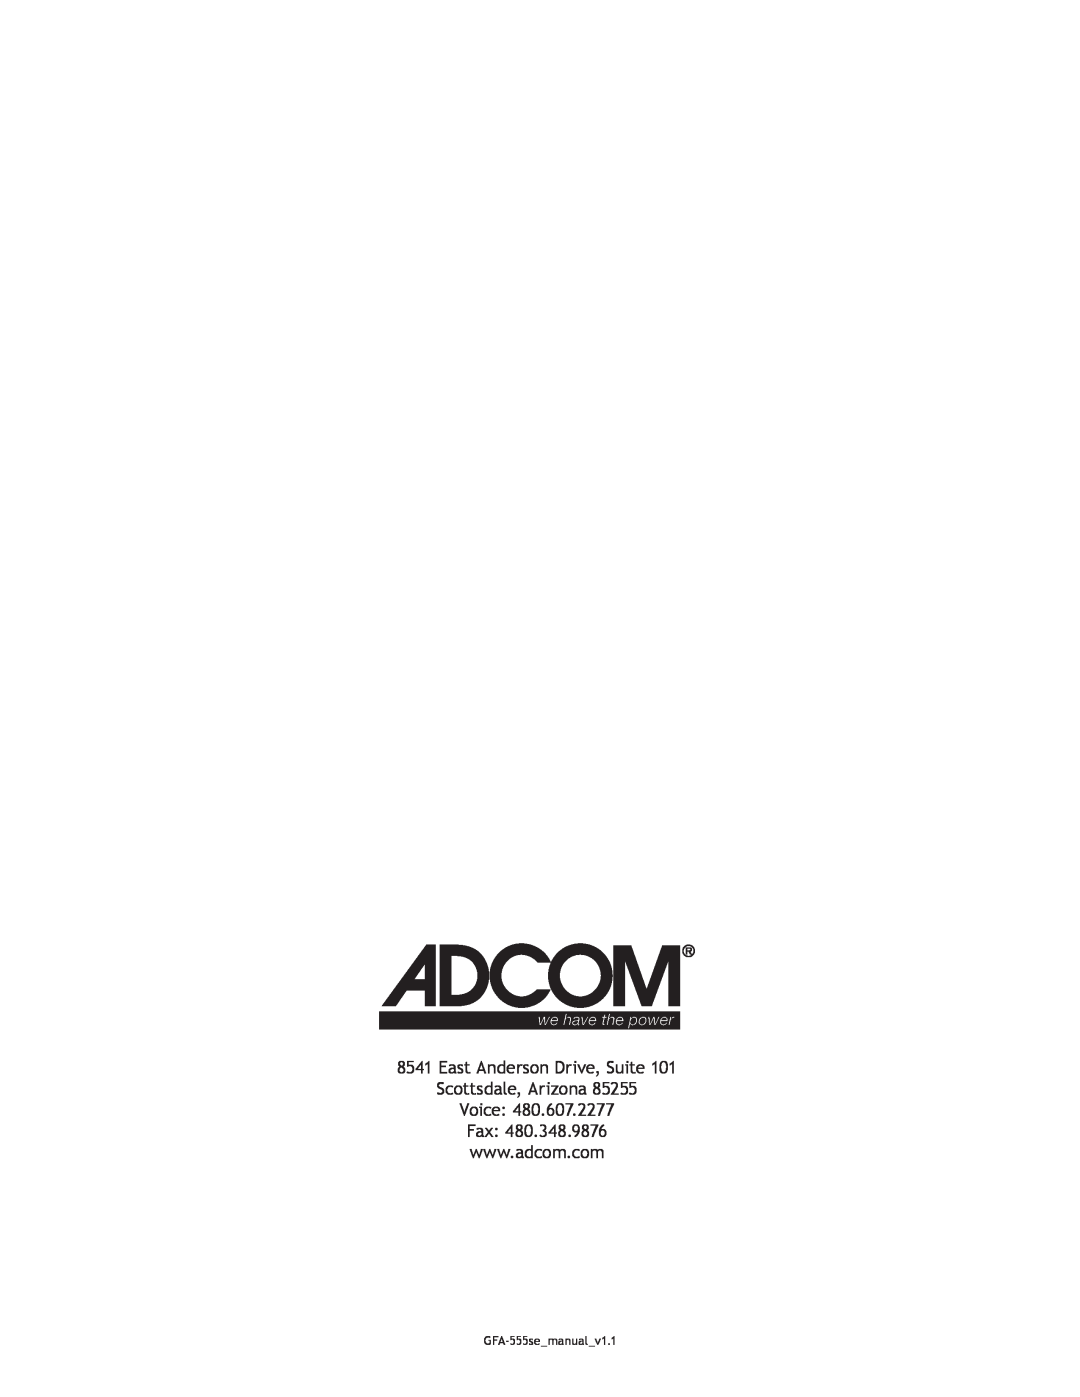 Adcom owner manual East Anderson Drive, Suite, GFA-555se manual 